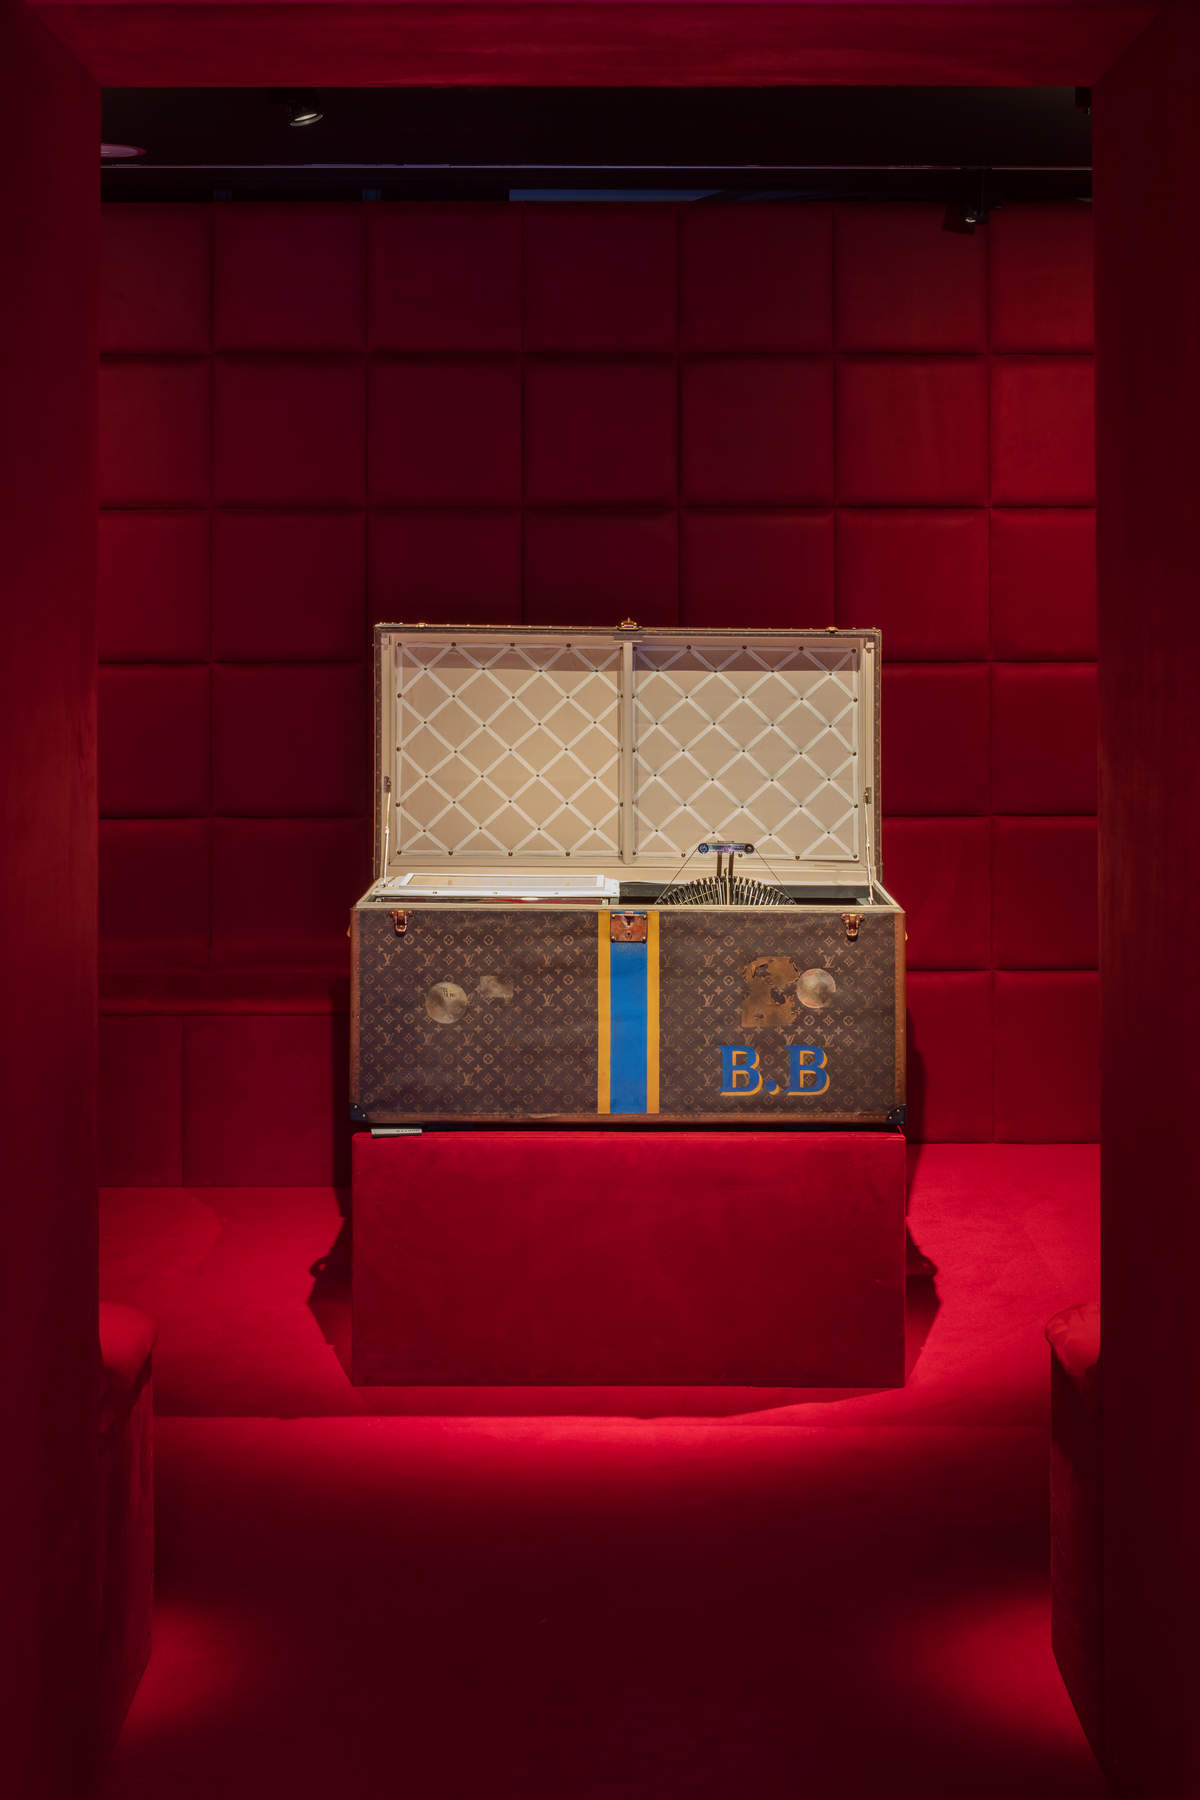 Louis Vuitton ups the price of non-leather handbags - Luxurylaunches